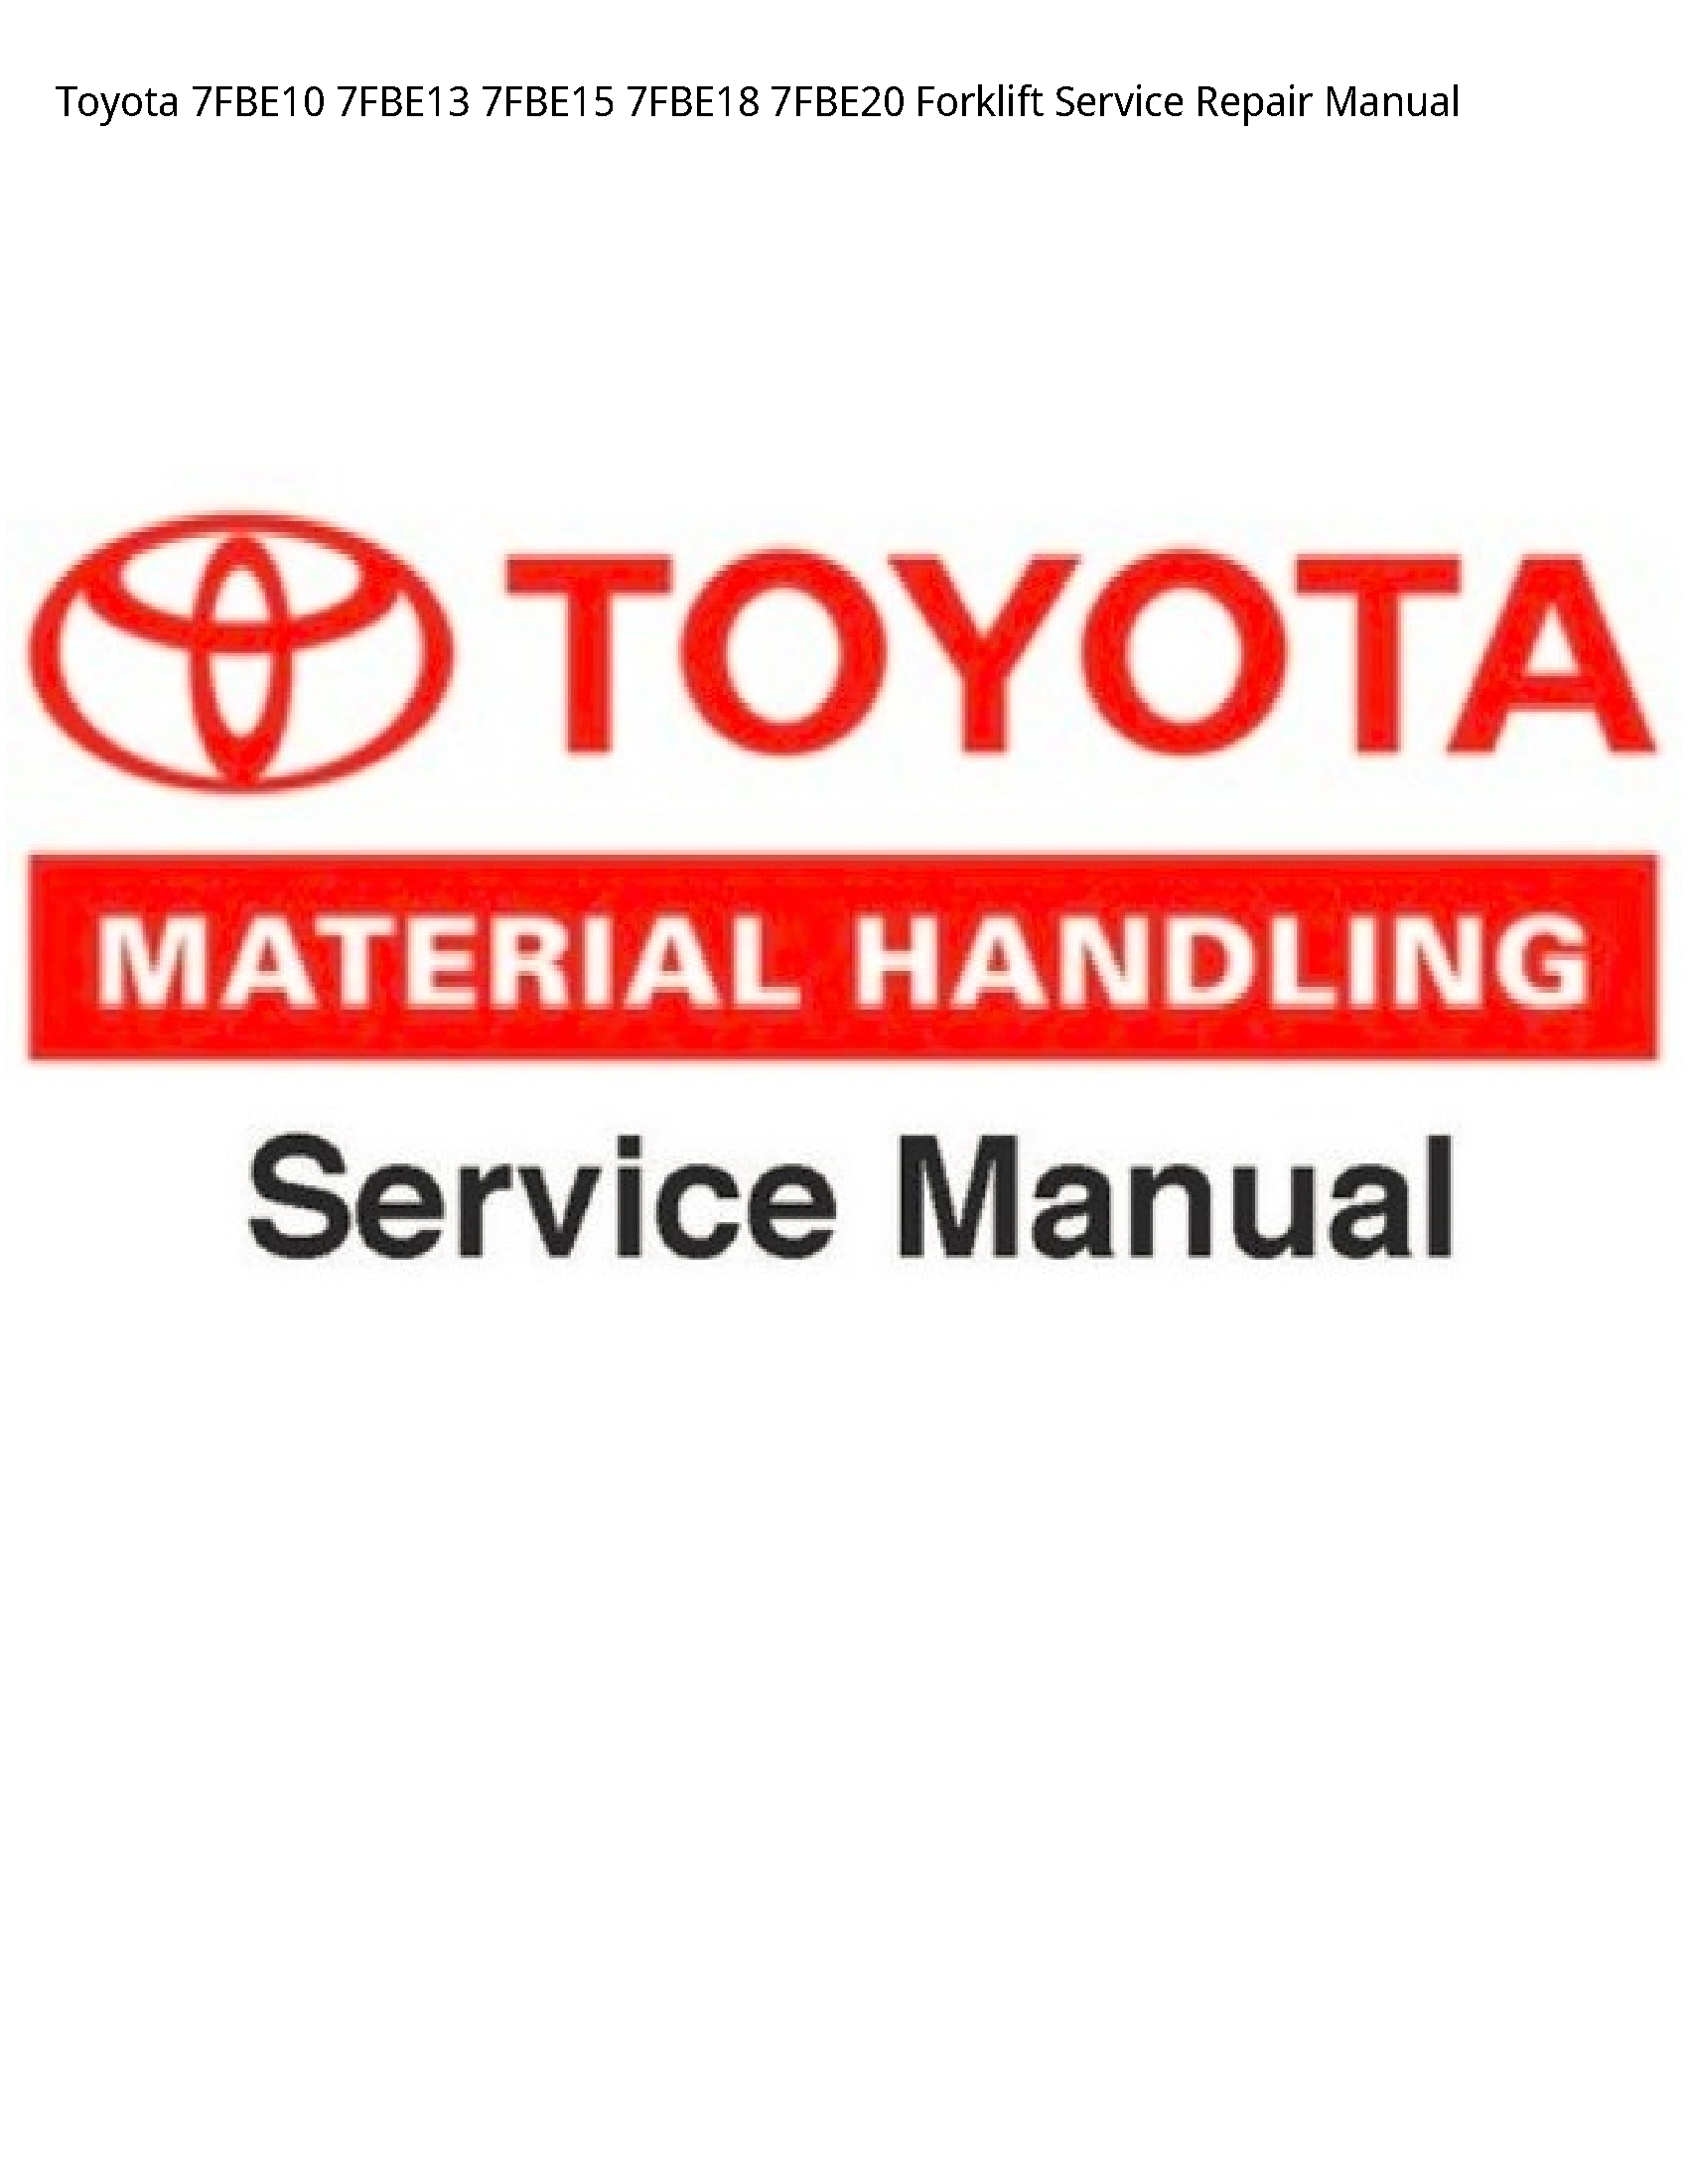 Toyota 7FBE10 Forklift manual